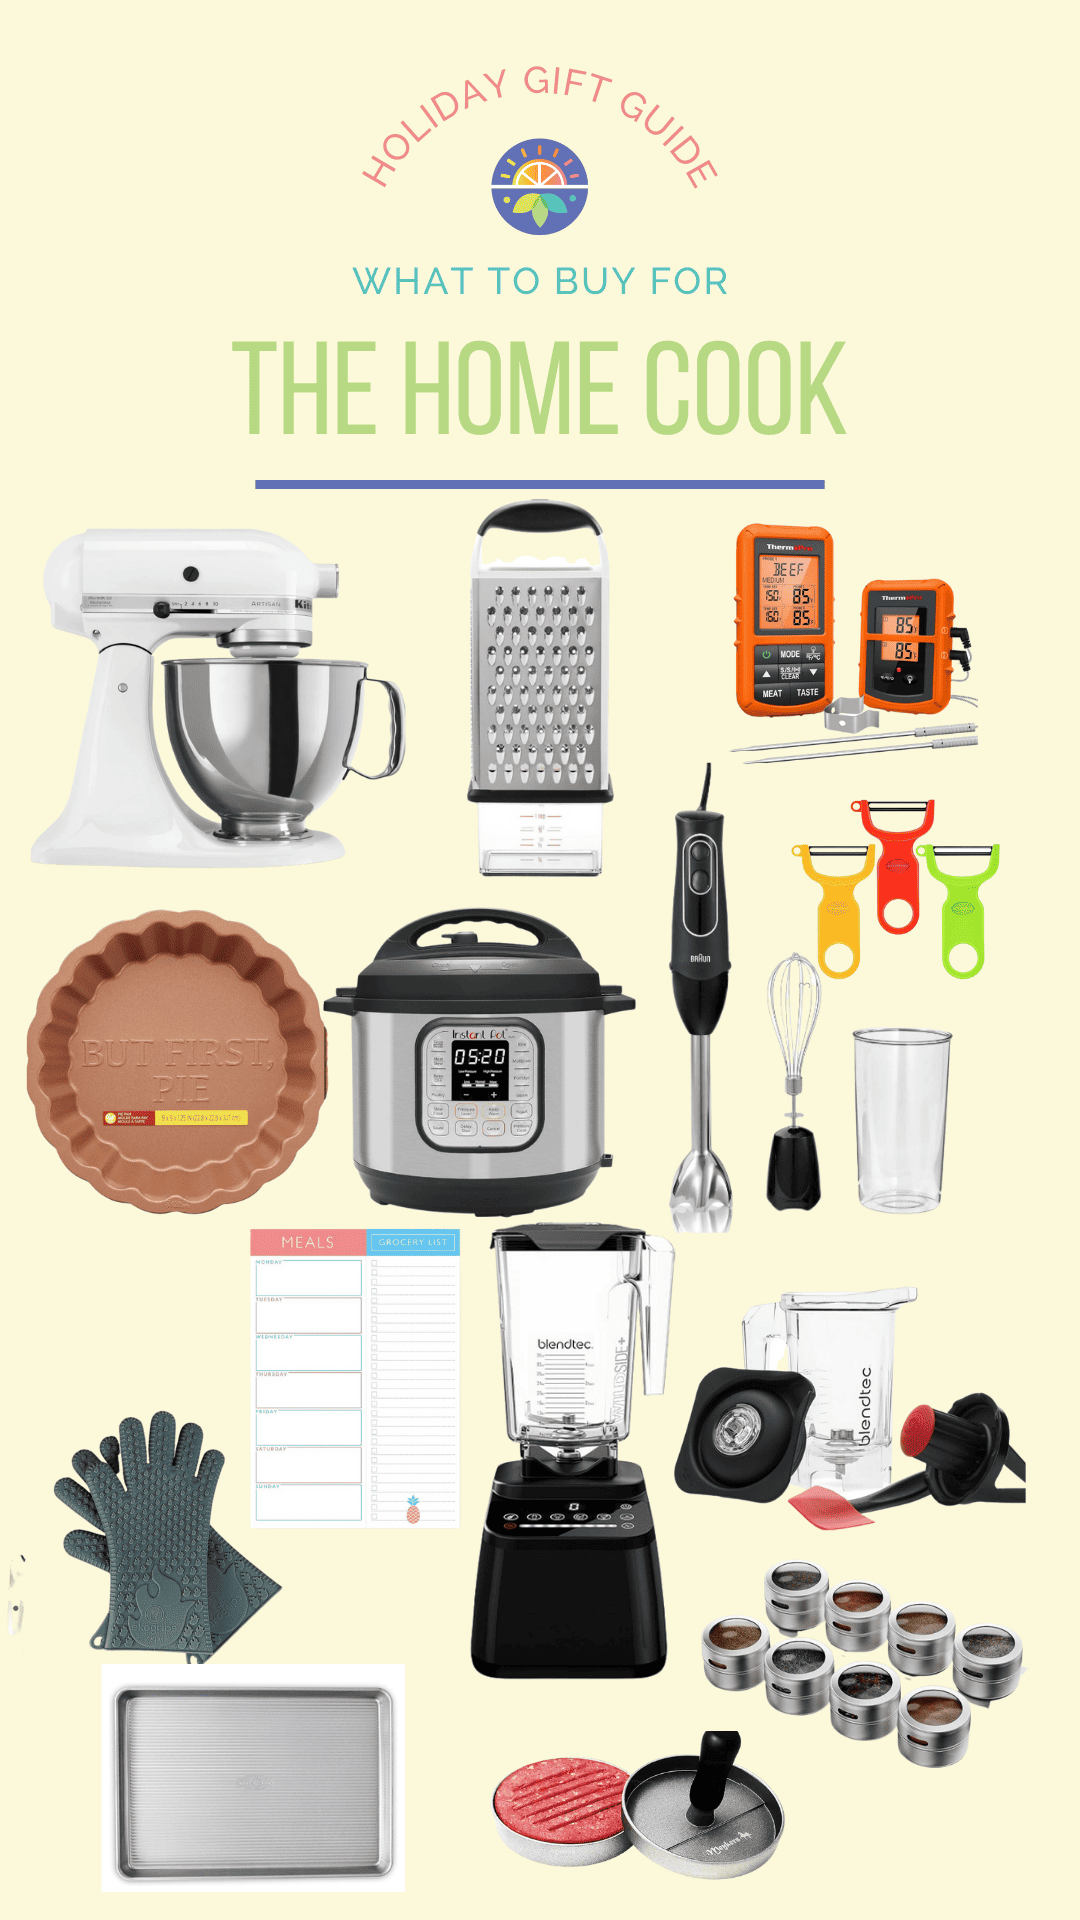 holiday gift guide, what to buy for the home cook. Features images of stand mixer, box grater, thermometer, peeler, pie plate, instant pot, meal planner pad, immersion blender, blendtech blender, baking sheet, spice jars, burger press, and high heat glove.